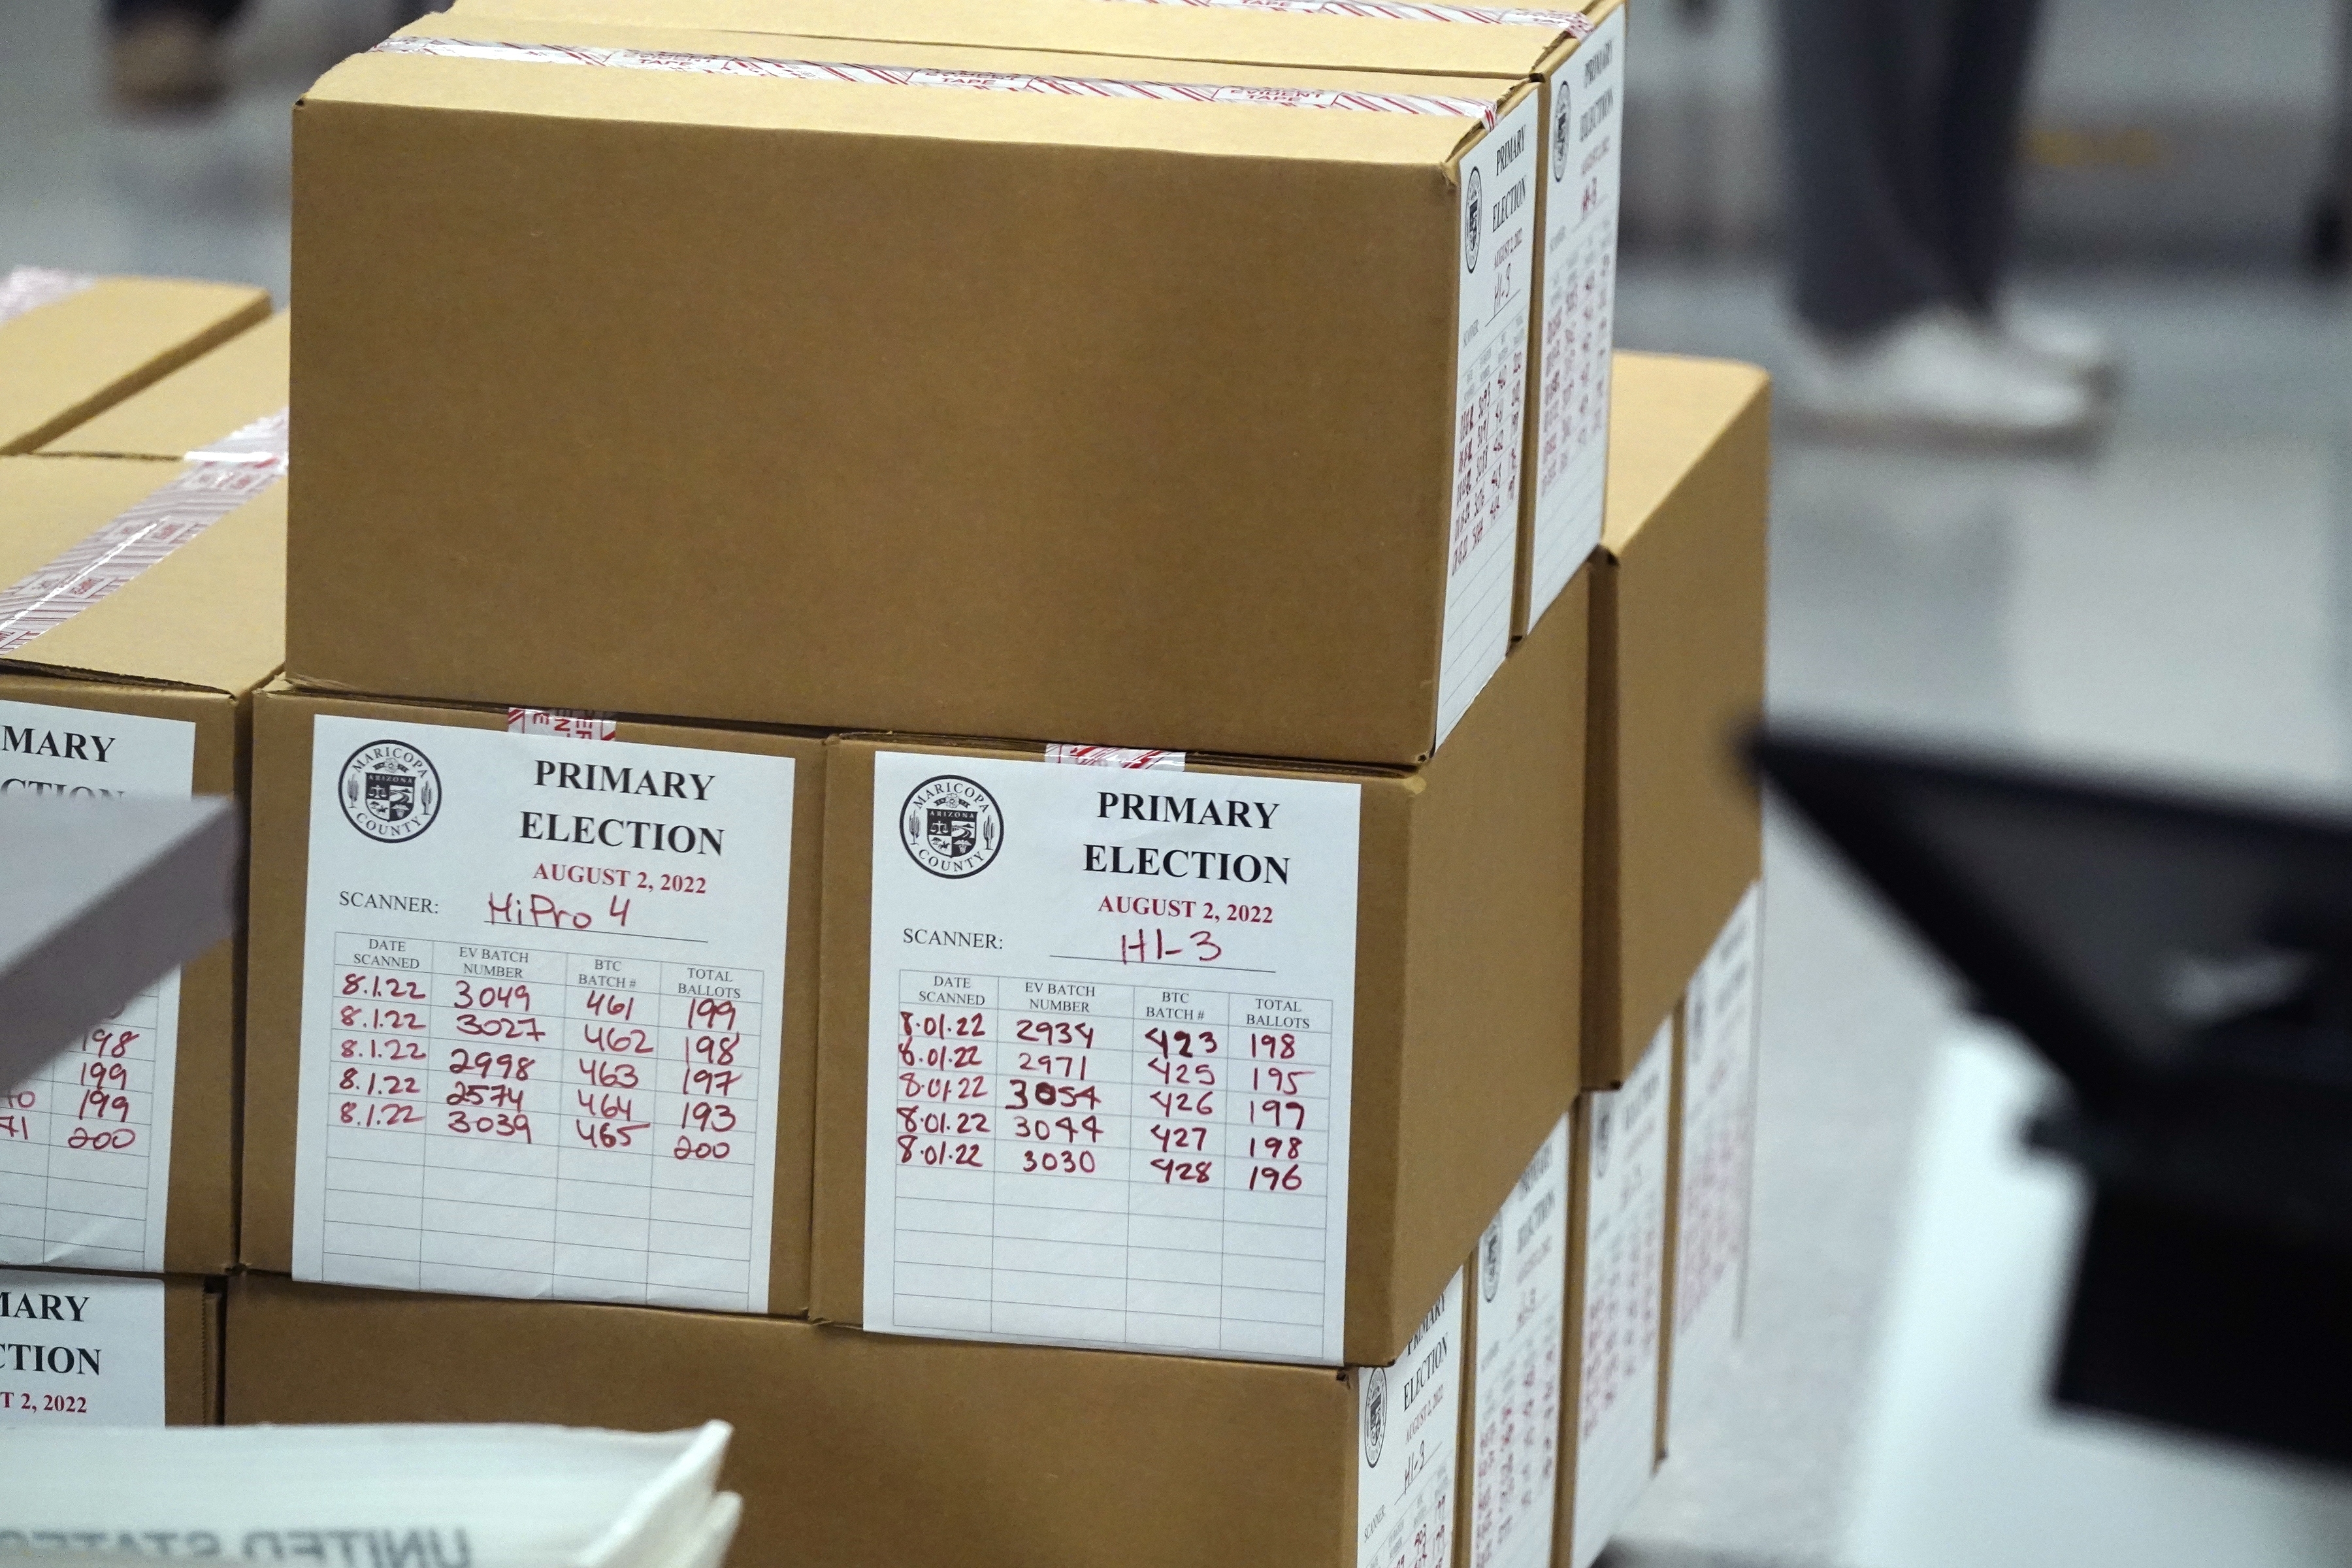 Boxes of ballots sit in the Maricopa County Recorder and Elections Department offices after Arizona's primary election Wednesday, Aug. 3, 2022, in Phoenix. (AP Photo/Ross D. Franklin)